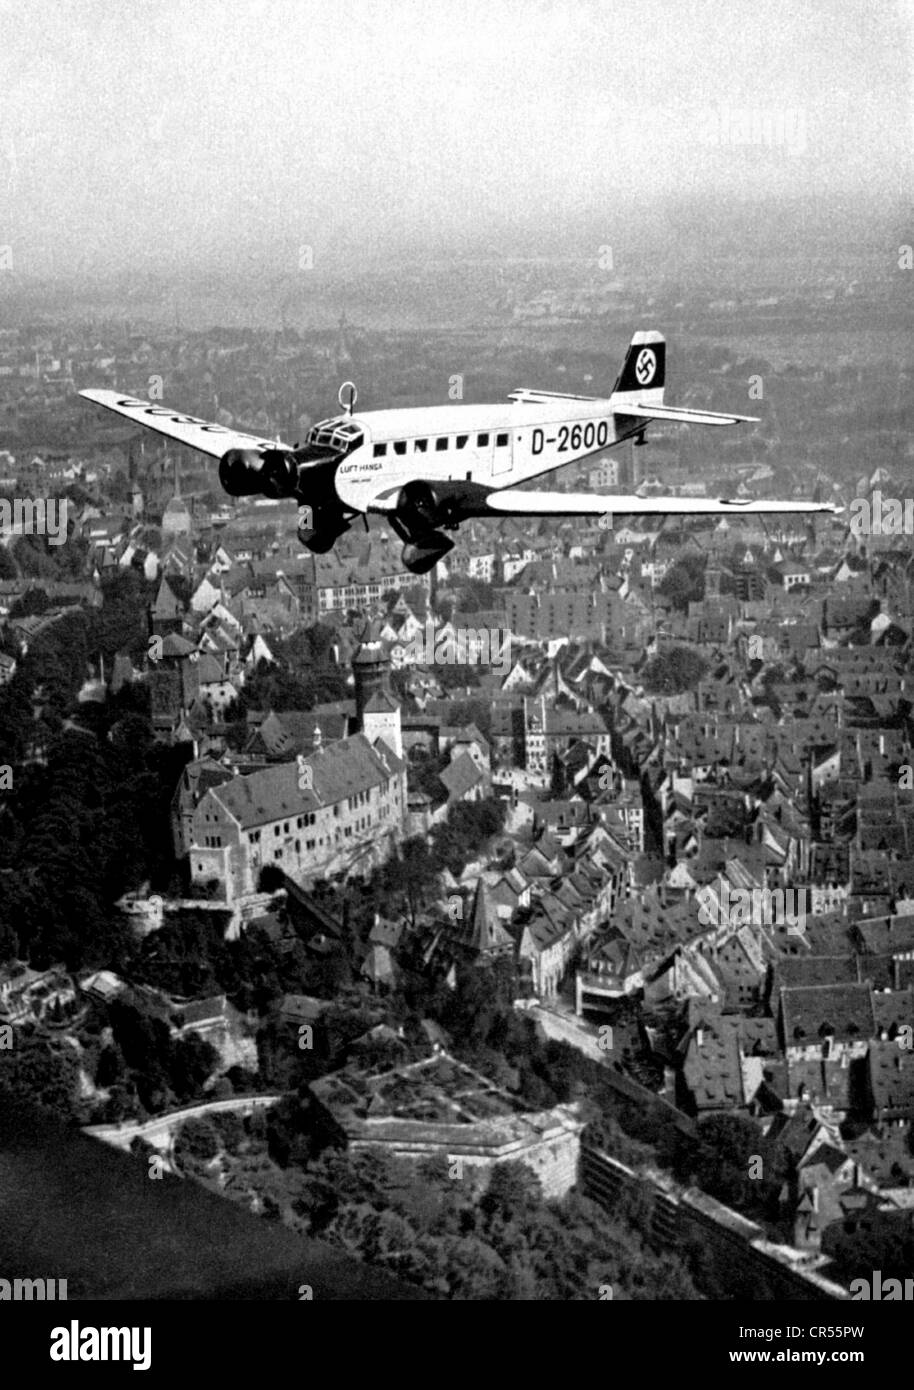 Hitler, Adolf, 20.4.1889 - 30.4.1945, German politician (NSDAP), Fuehrer and Reich Chancellor since 1933, his aircraft Junkers Ju 52, identification number D-2600, on the way to the Nuremberg Rally 1934, Stock Photo